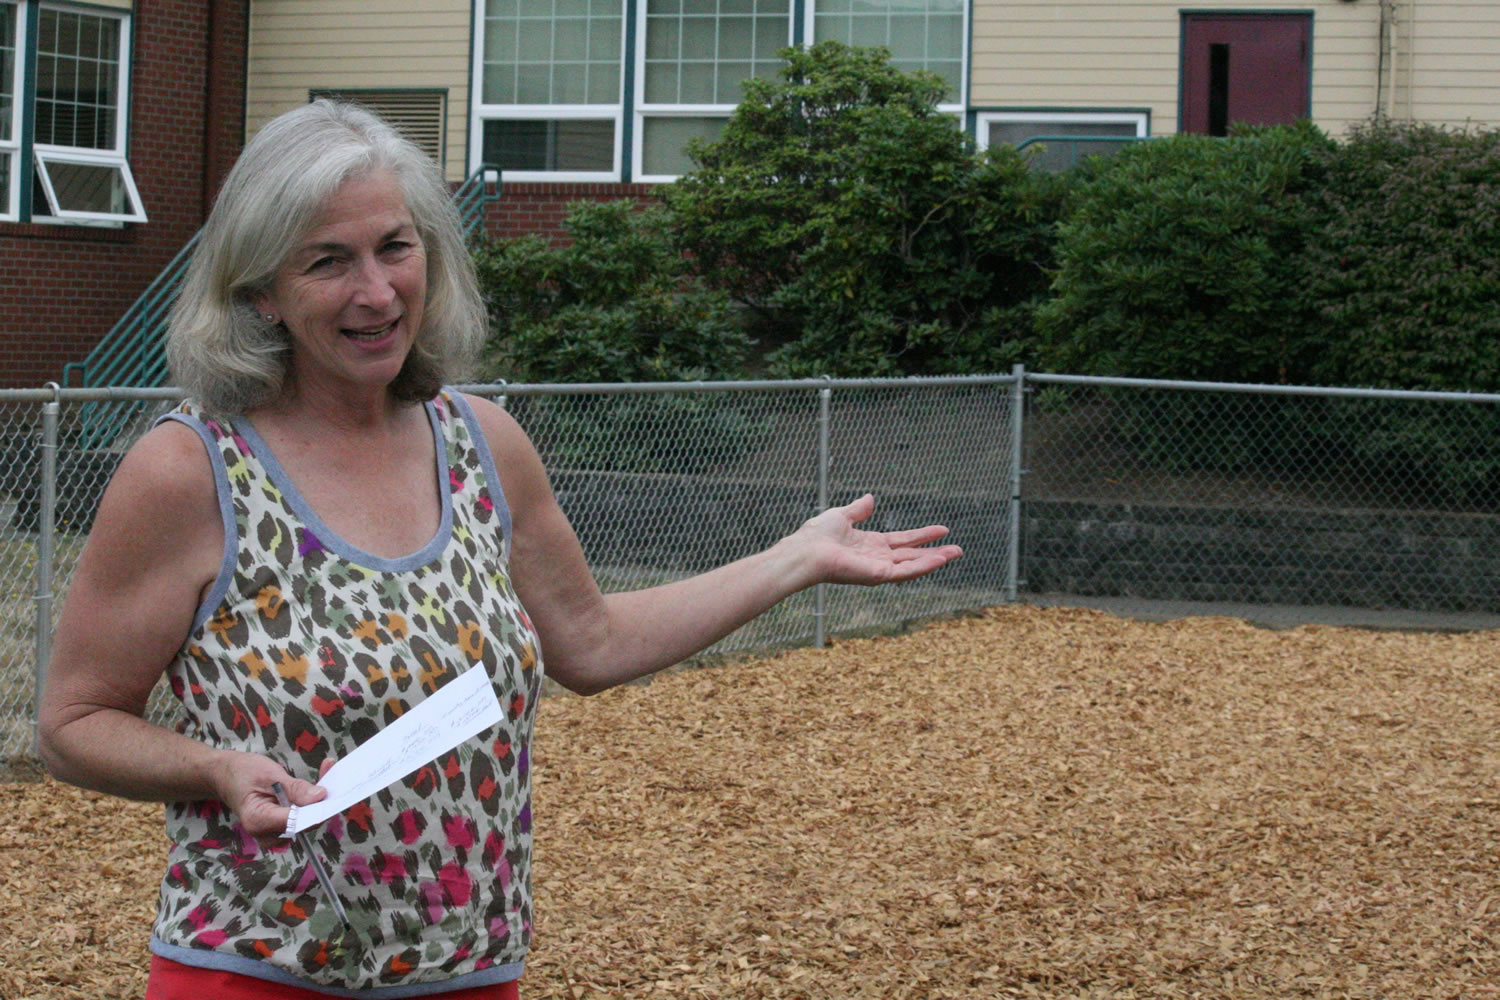 Lisa Young, early learning technician for Washougal Community Education, is excited about a new preschool playground being installed on the Hathaway Elementary School campus. It was funded through a collaboration with Educational Opportunities for Children and Families, and with a grant from the Norman C.